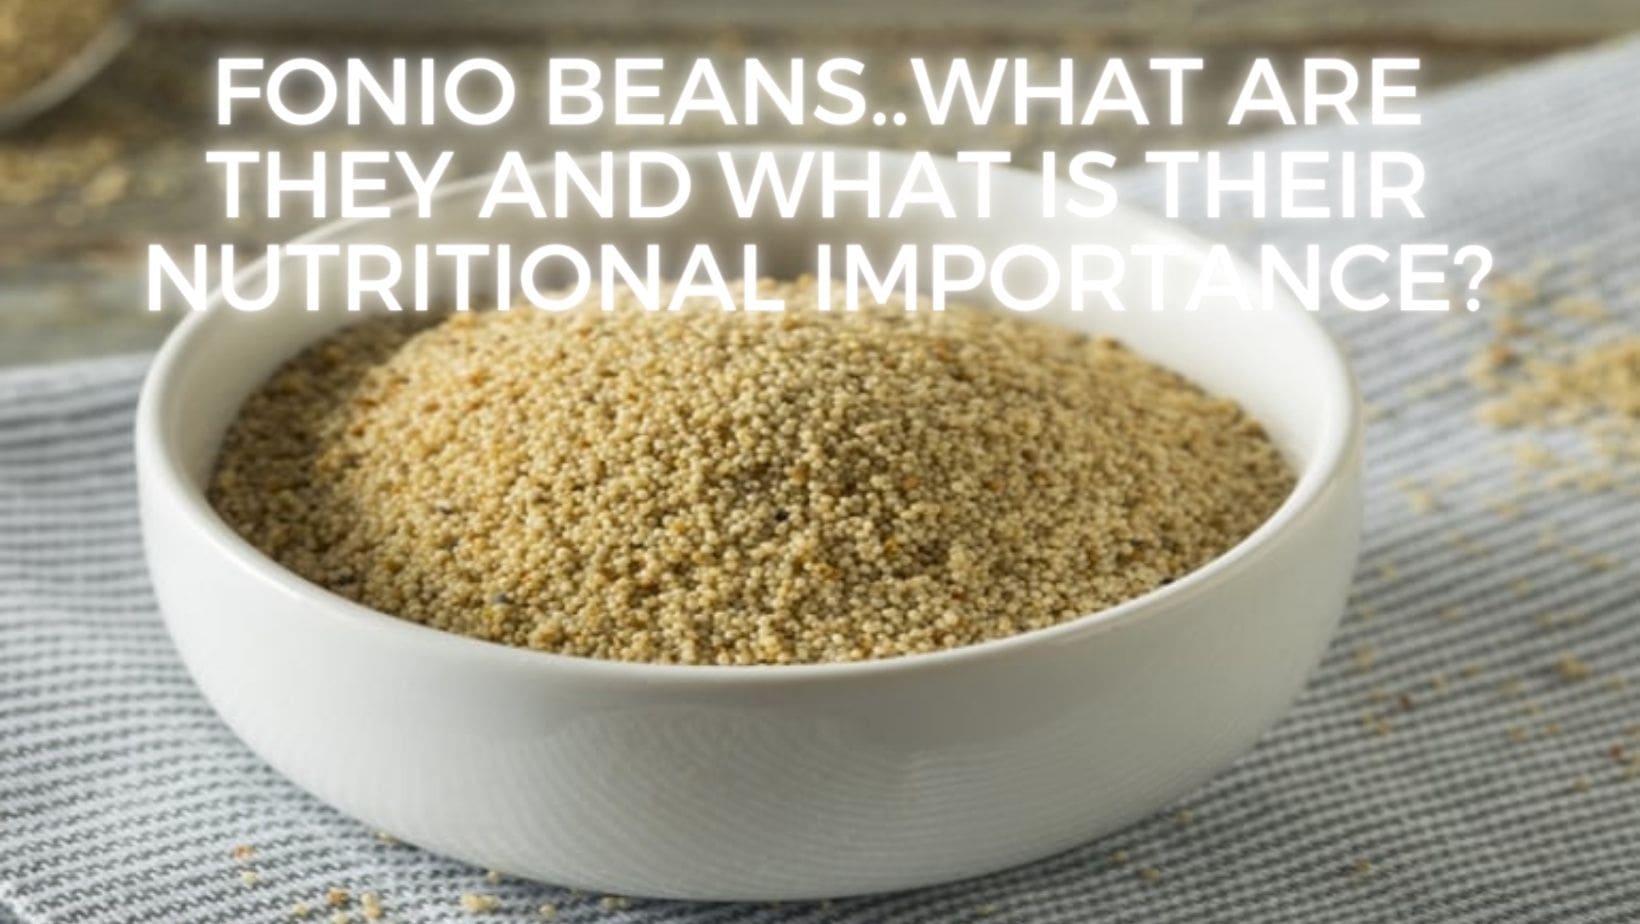 Fonio Beans >What Are They And What Is Their Nutritional Importance?